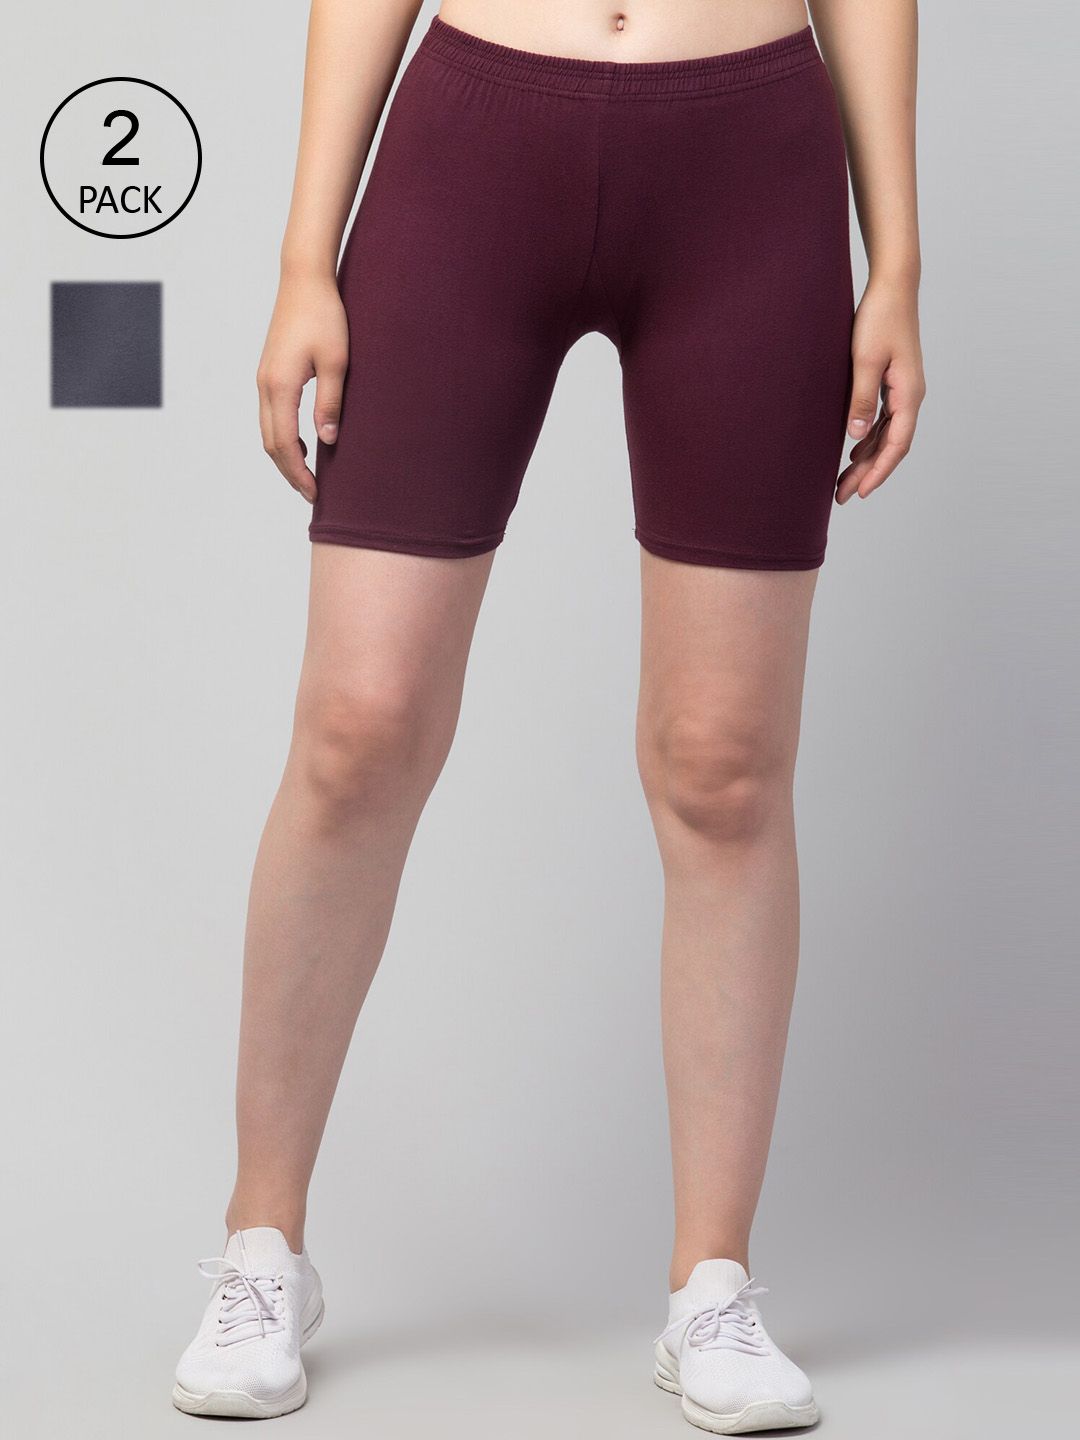 Apraa & Parma Women Grey Slim Fit Cycling Sports Shorts Price in India